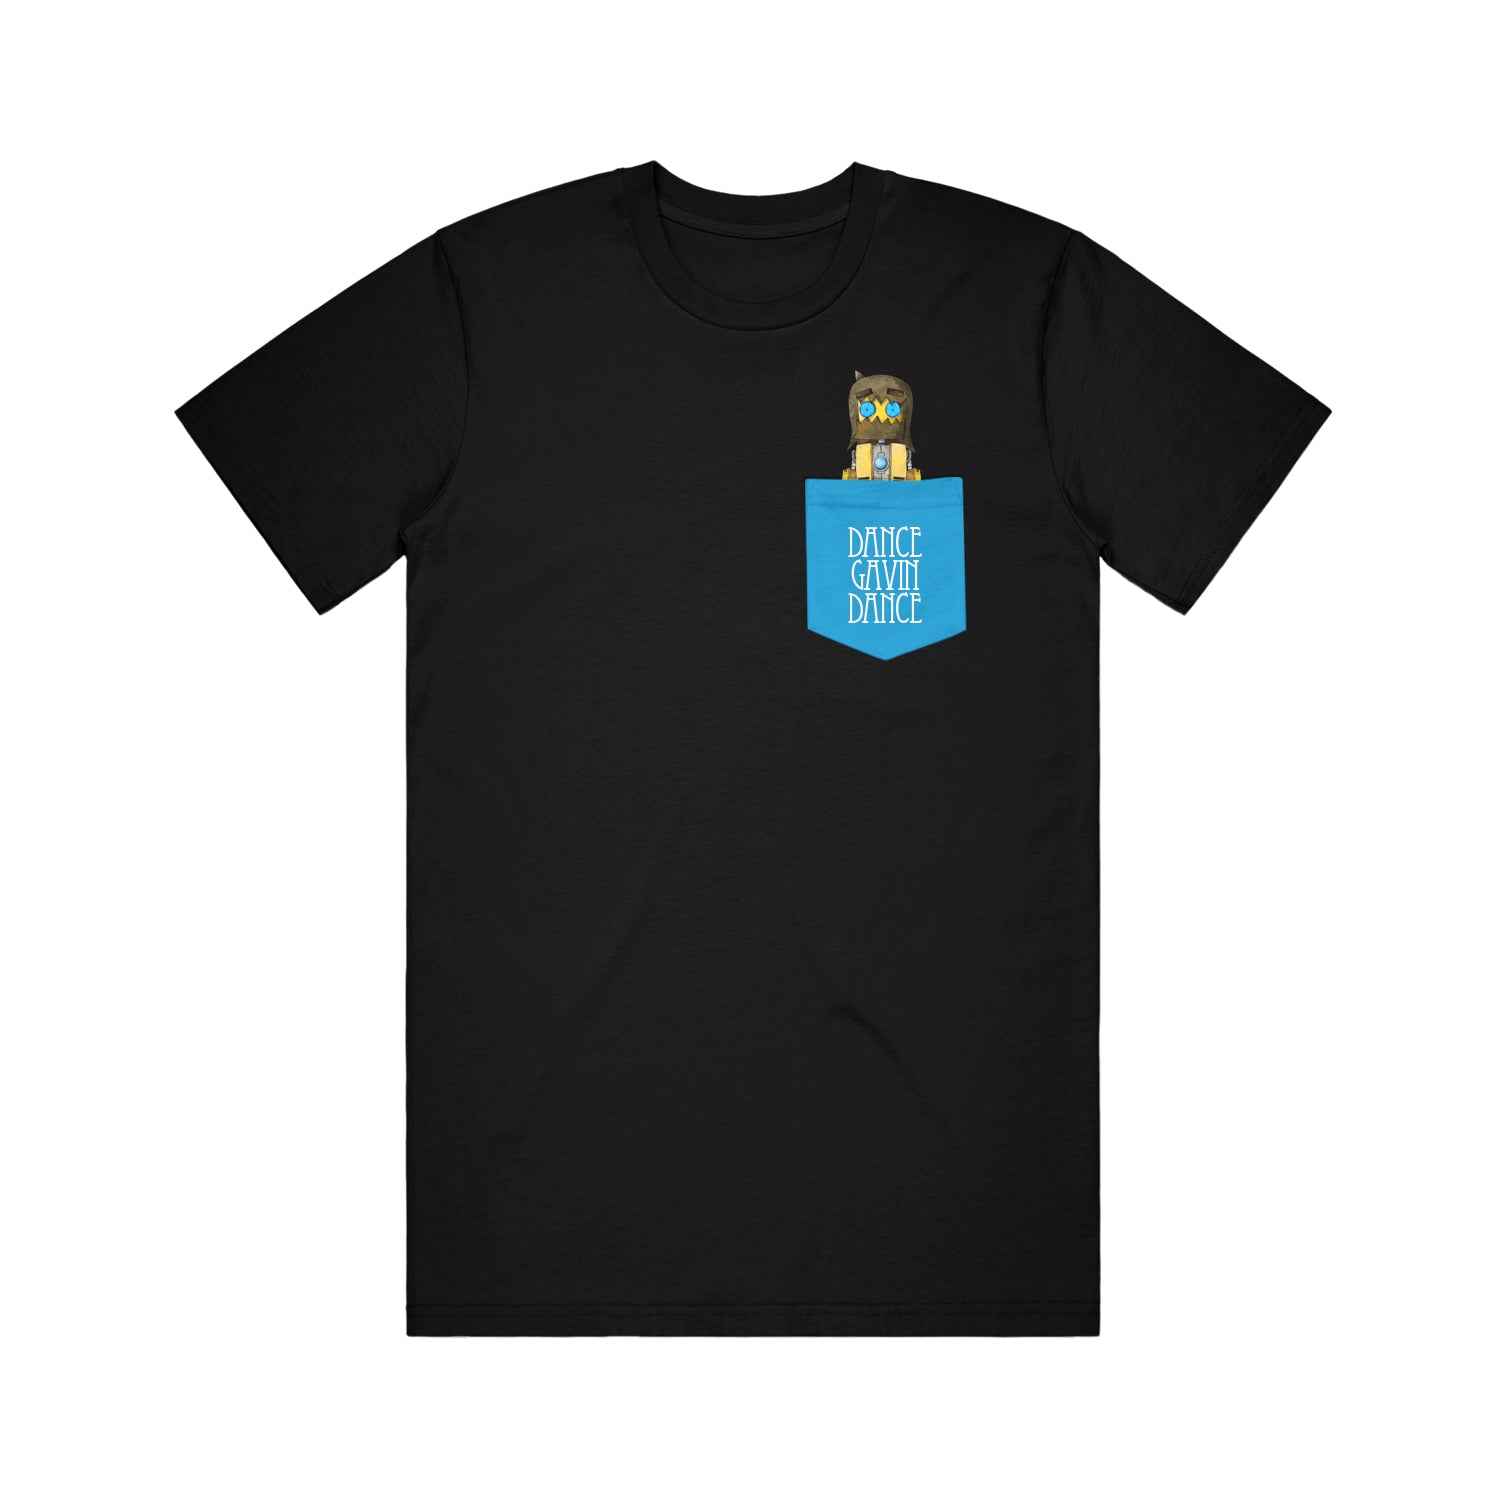 image of a black tee shirt on a white background. printed pocket on right with a robot character coming out of it.